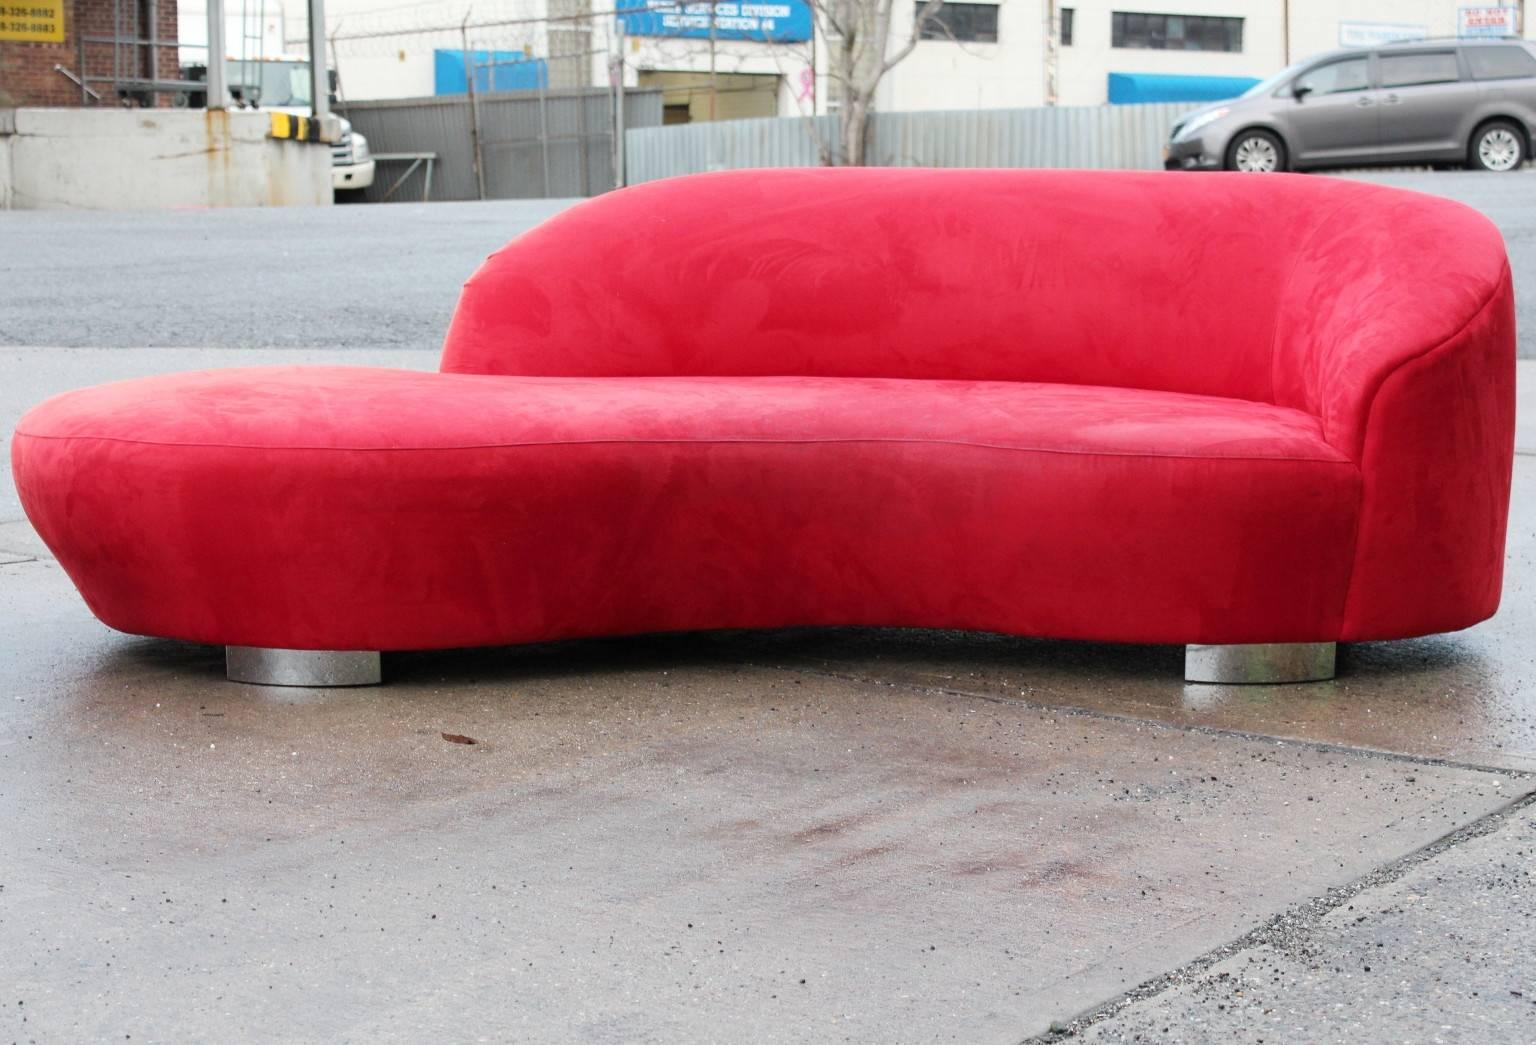 A 'Cloud' sofa, by designer Vladimir Kagan and produced circa 1980s, entirely in red ultrasuede on chrome plated steel base, with curved back, designated to one side of the sofa, facing right. Overall good condition, with some wear, consistent with